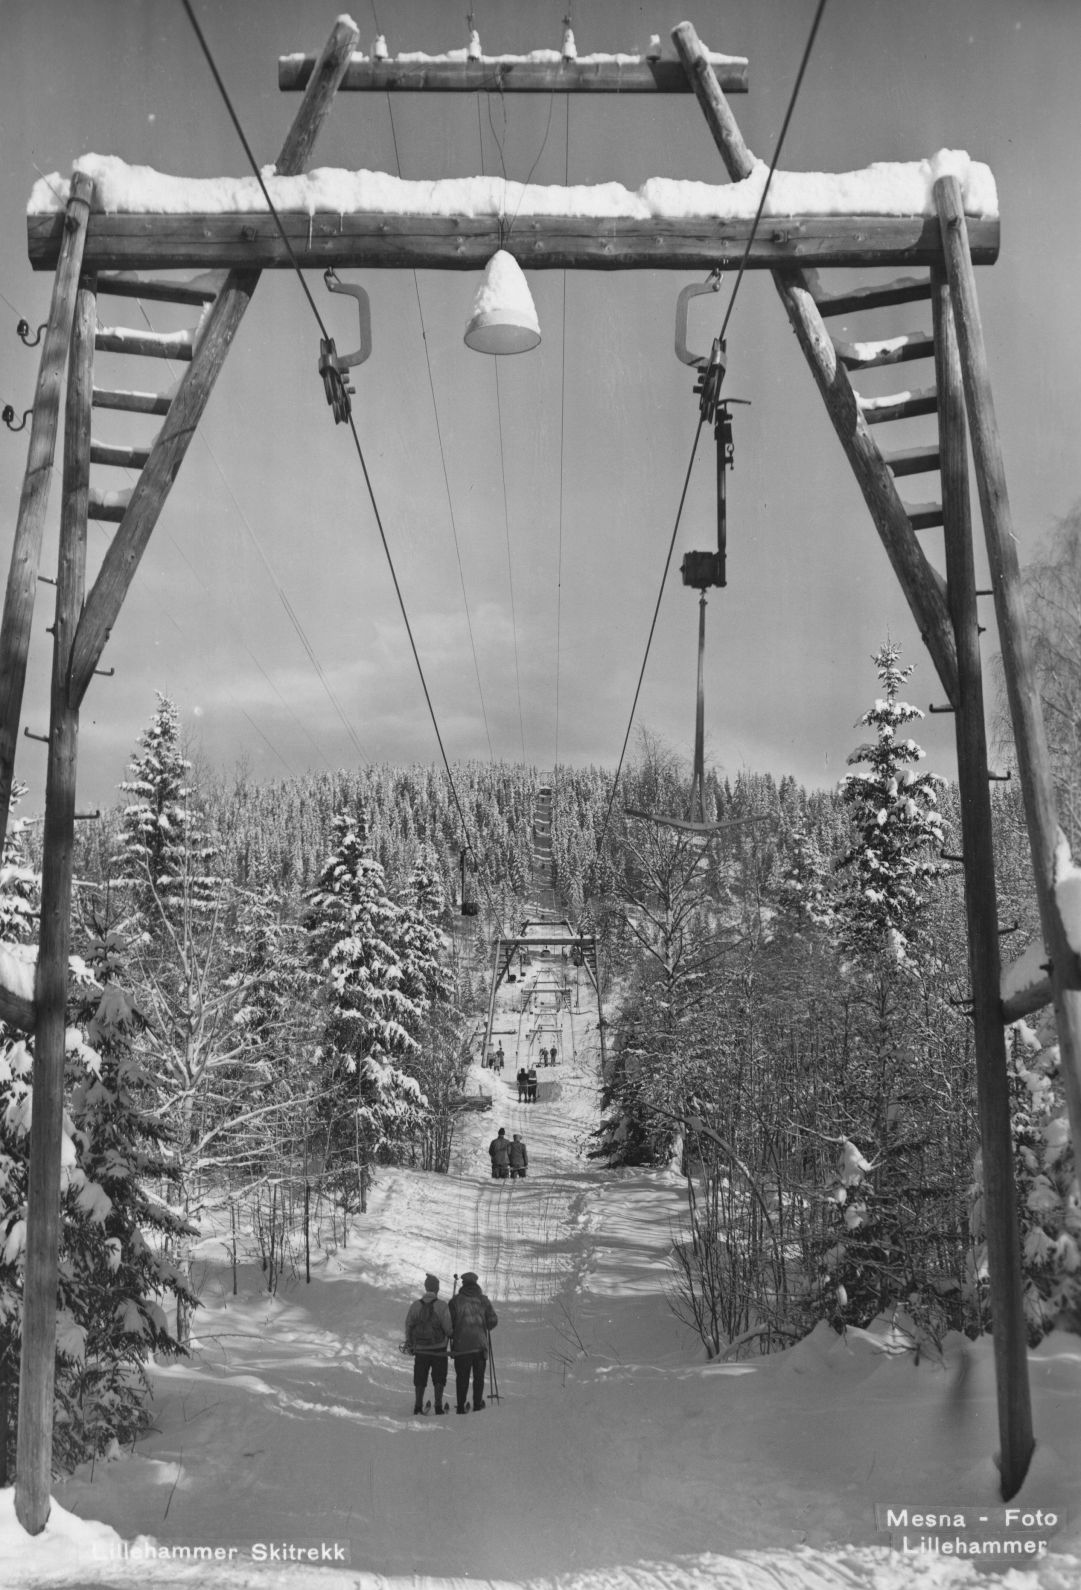 A ski lift in Lillehammer, southern Norway.